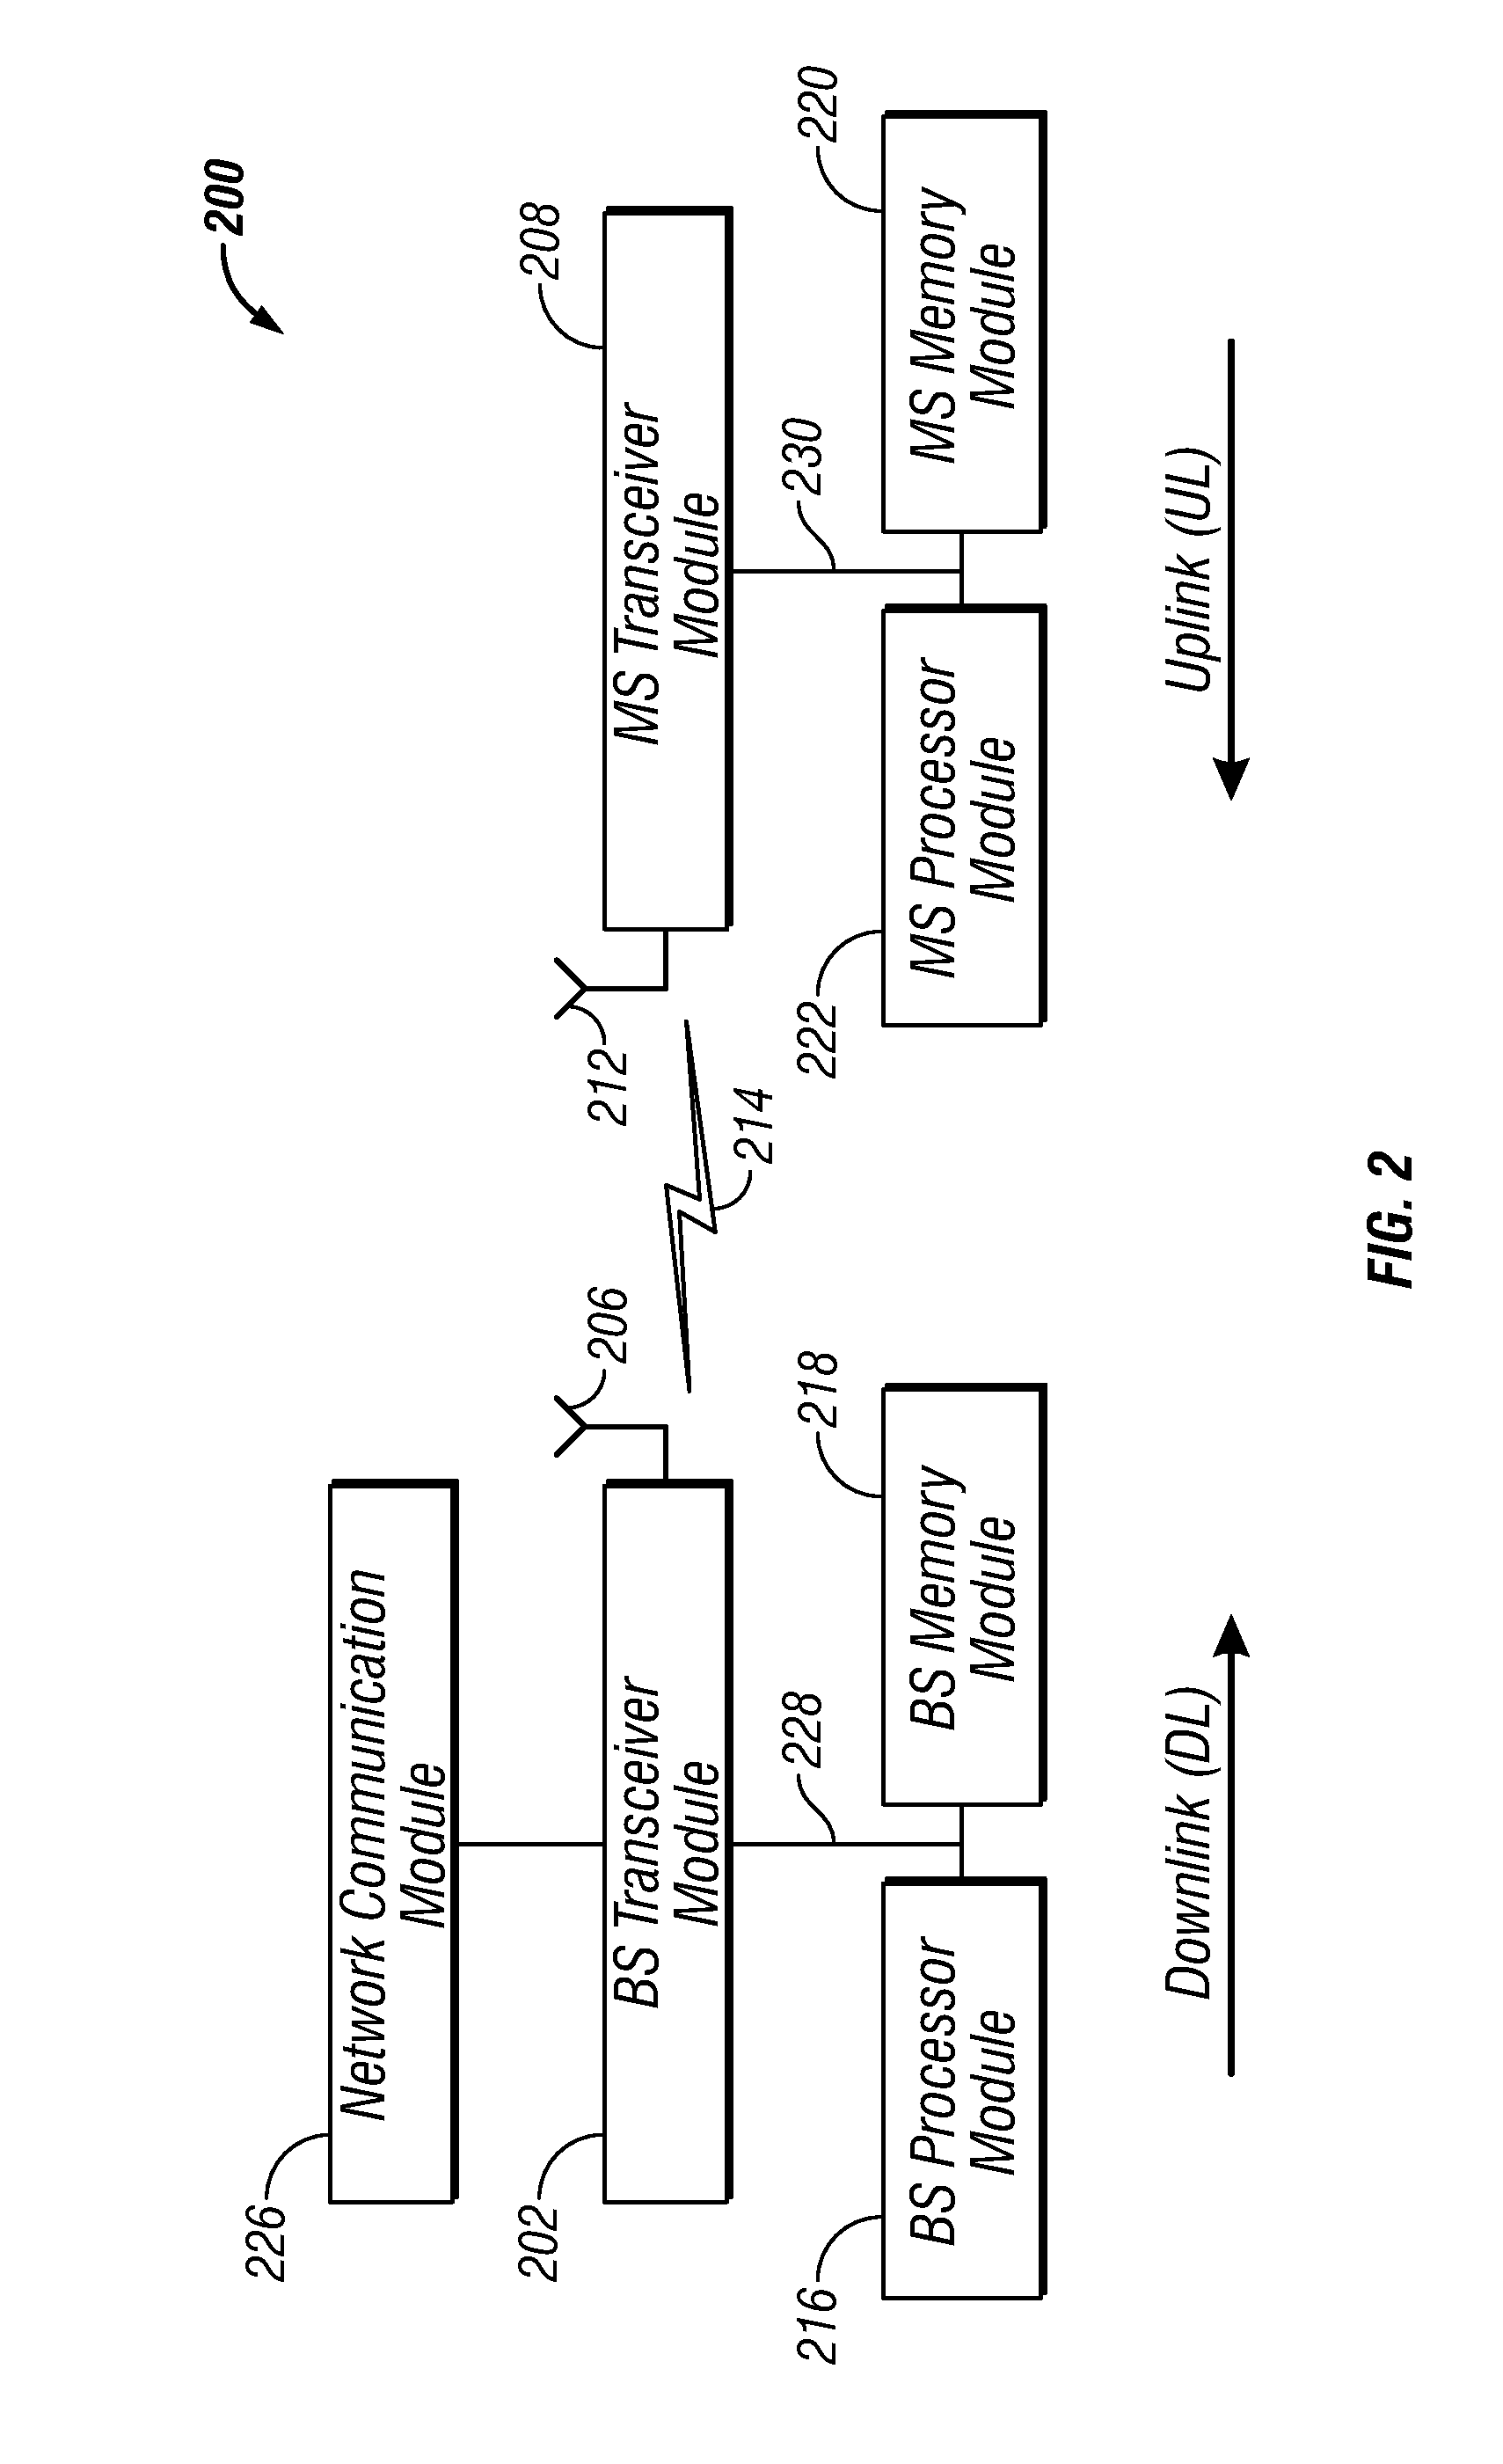 Method and system for variable-sized resource block allocation within OFDMA communication systems